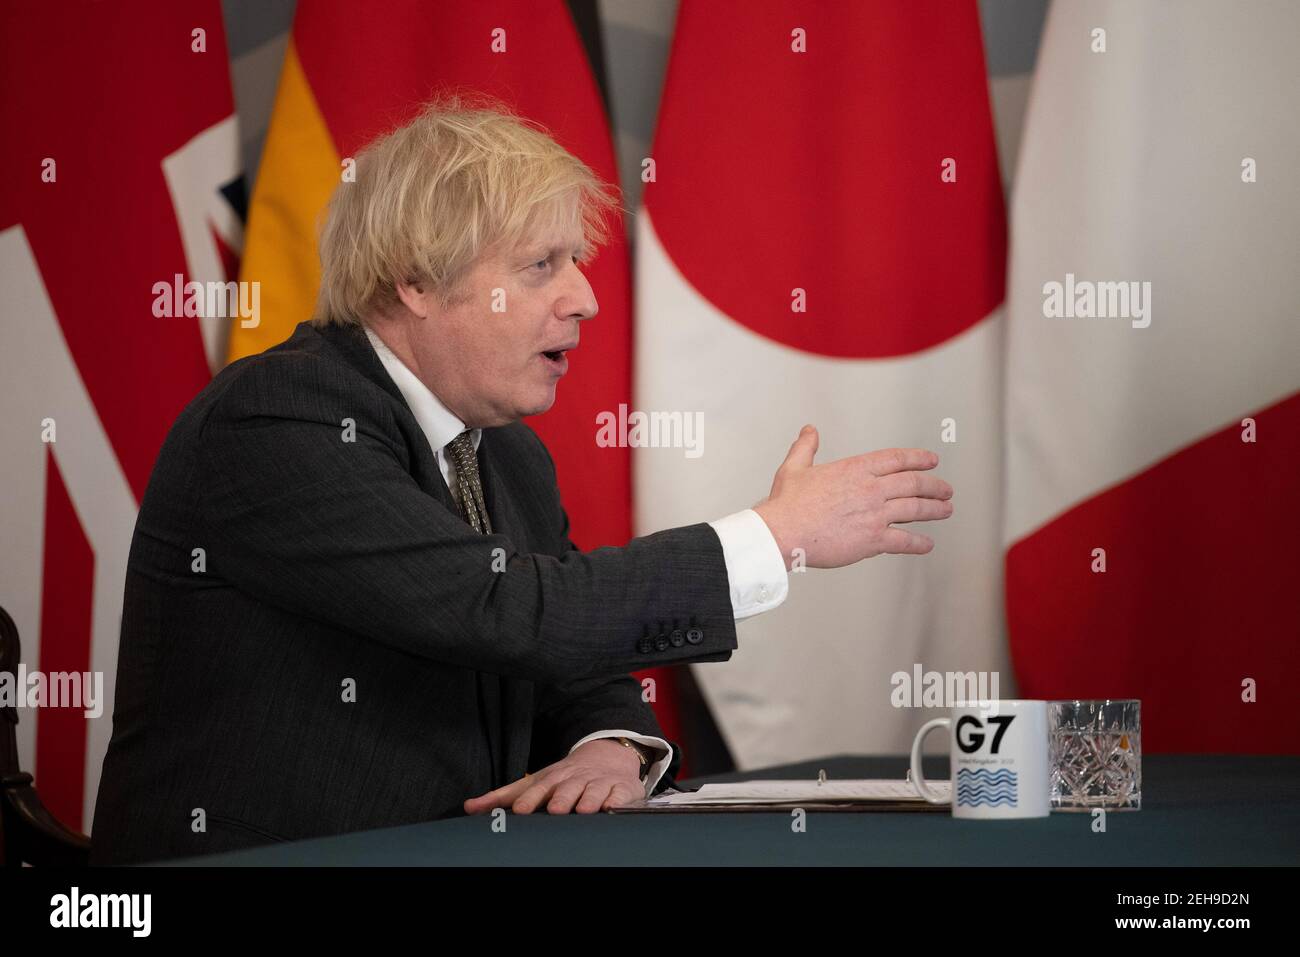 London, UK. 19th Feb 2021.  British Prime Minister Boris Johnson speaks during a virtual meeting of the leaders of the Group of Seven at Downing Street in London, Britain, on Feb. 19, 2021. The leaders of the Group of Seven (G7) on Friday pledged to cooperate with the Group of 20 (G20) and other international institutions on a range of global issues including fighting coronavirus pandemic, climate change and upholding the rules-based multilateral trading system, sending signals that the G7 will be committed to multilateral cooperation. Stock Photo